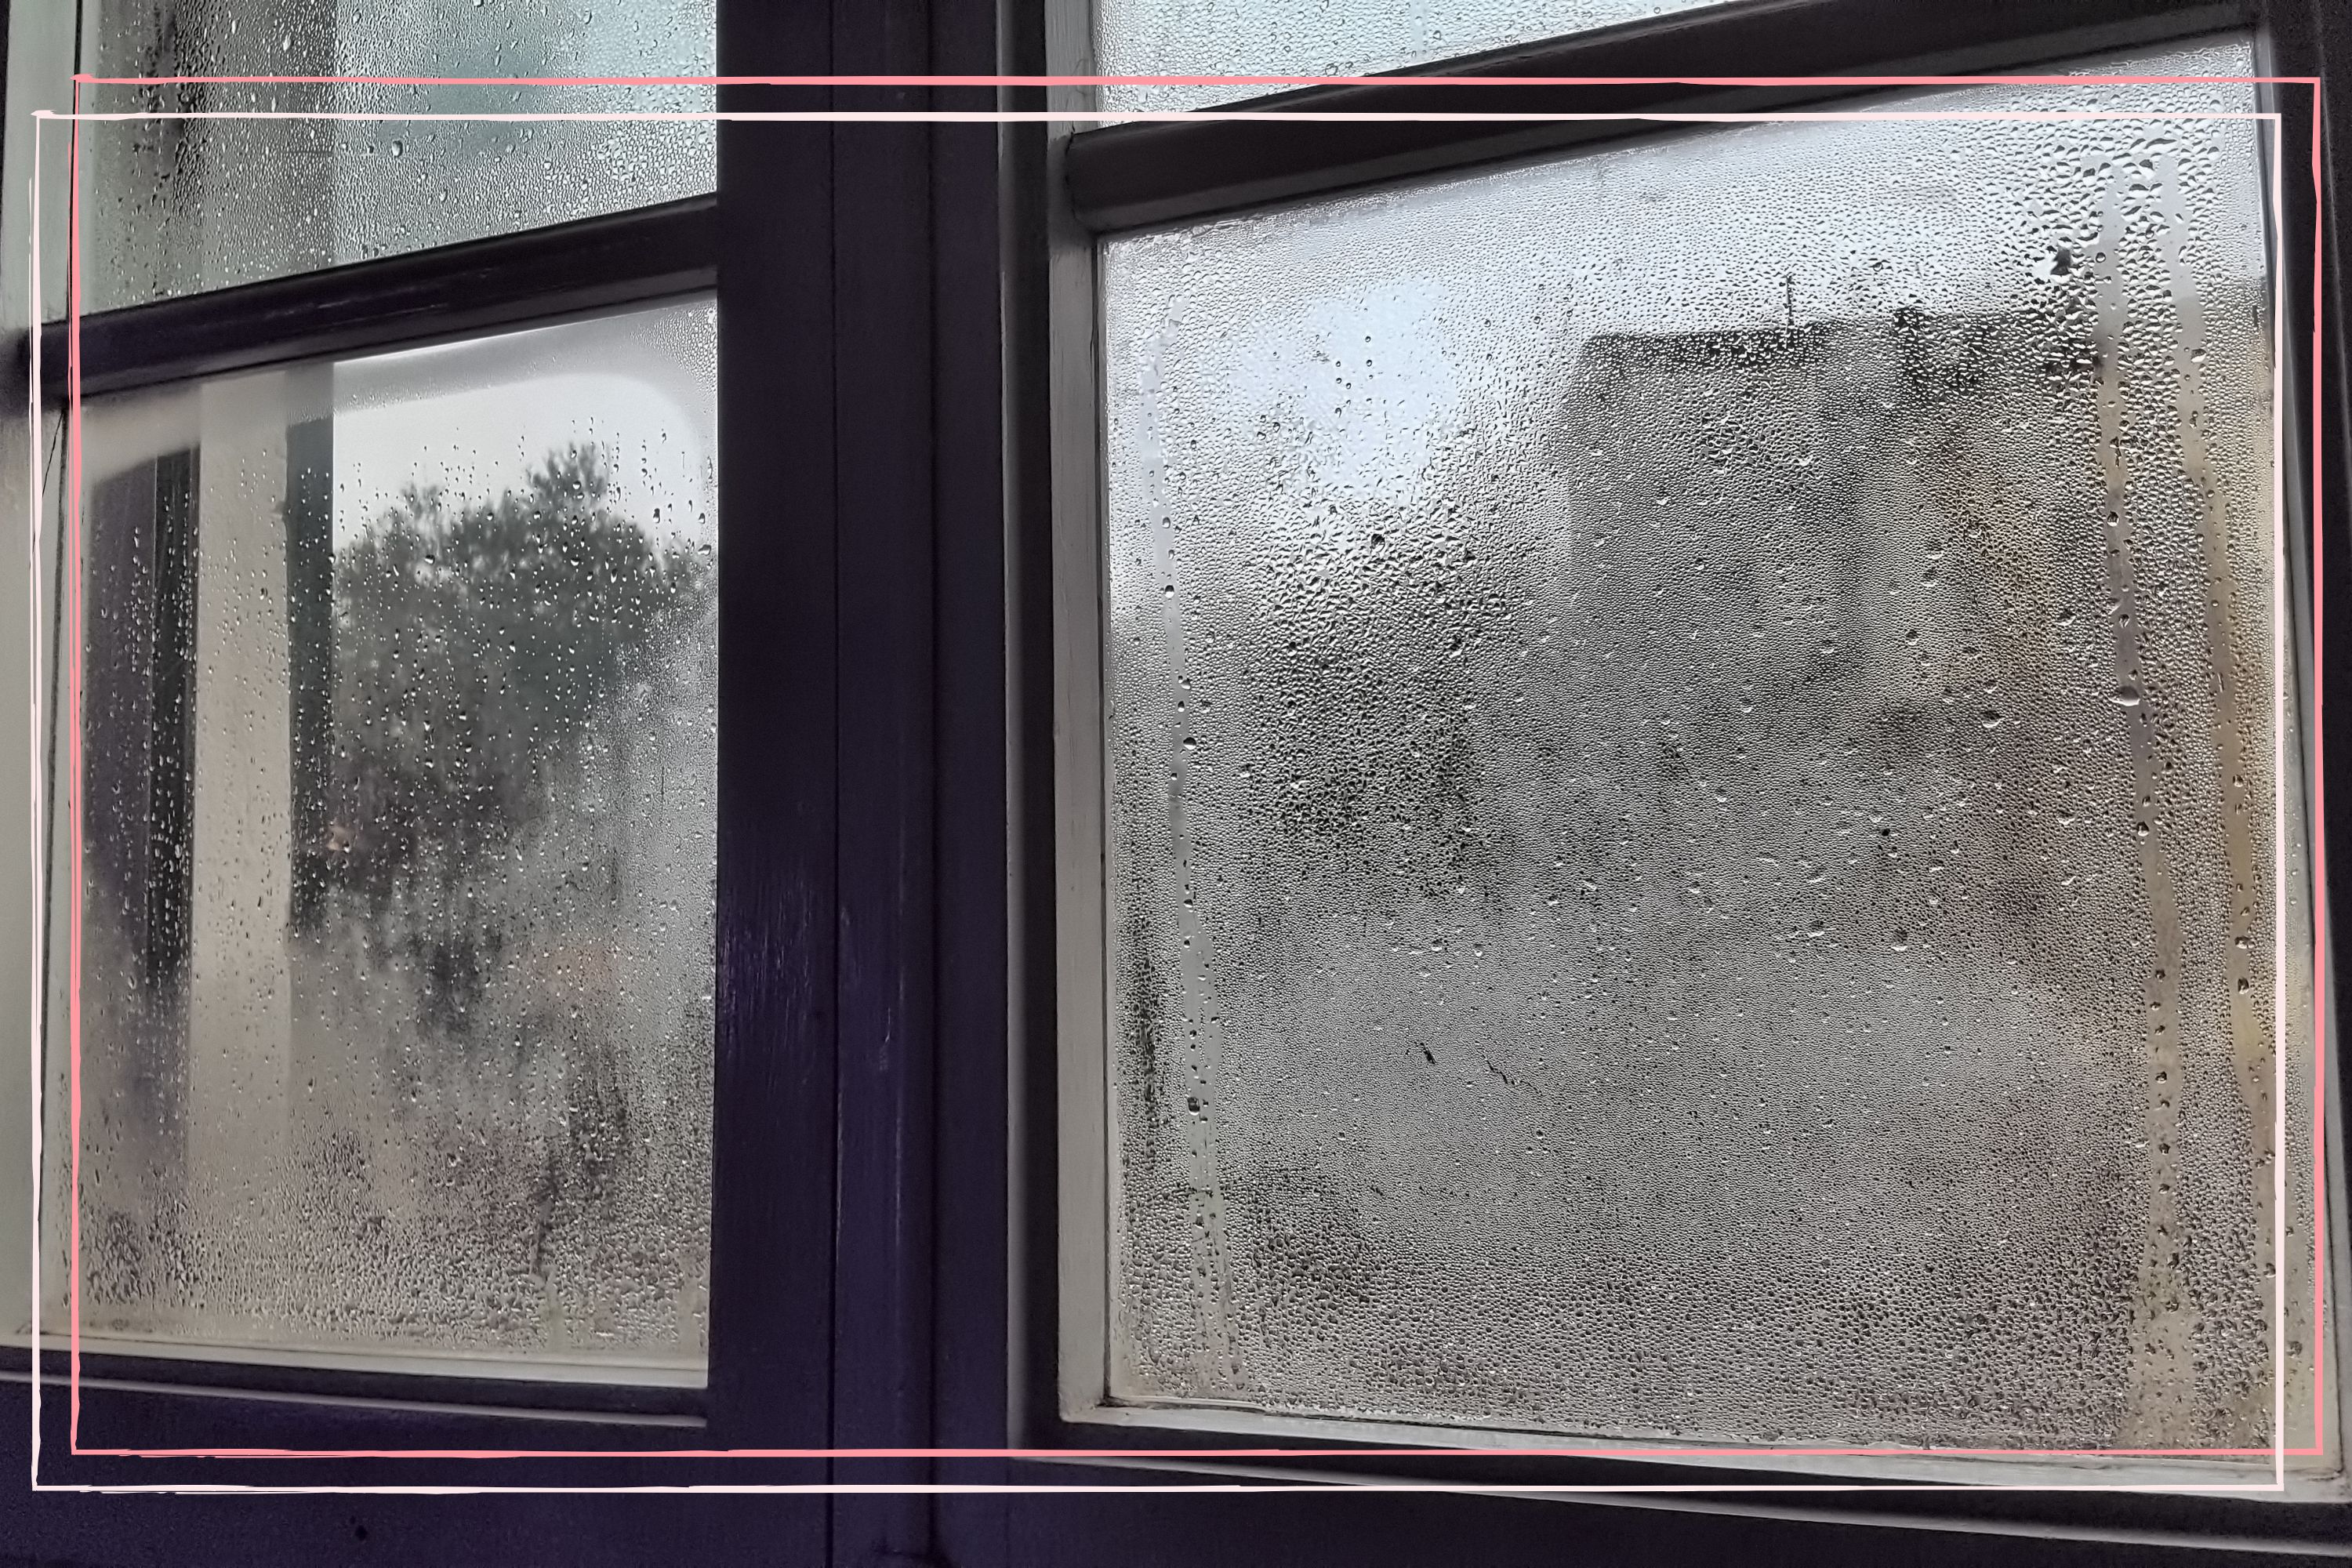 HOW TO STOP CONDENSATION ON WINDOWS  Stop condensation in winter on windows  